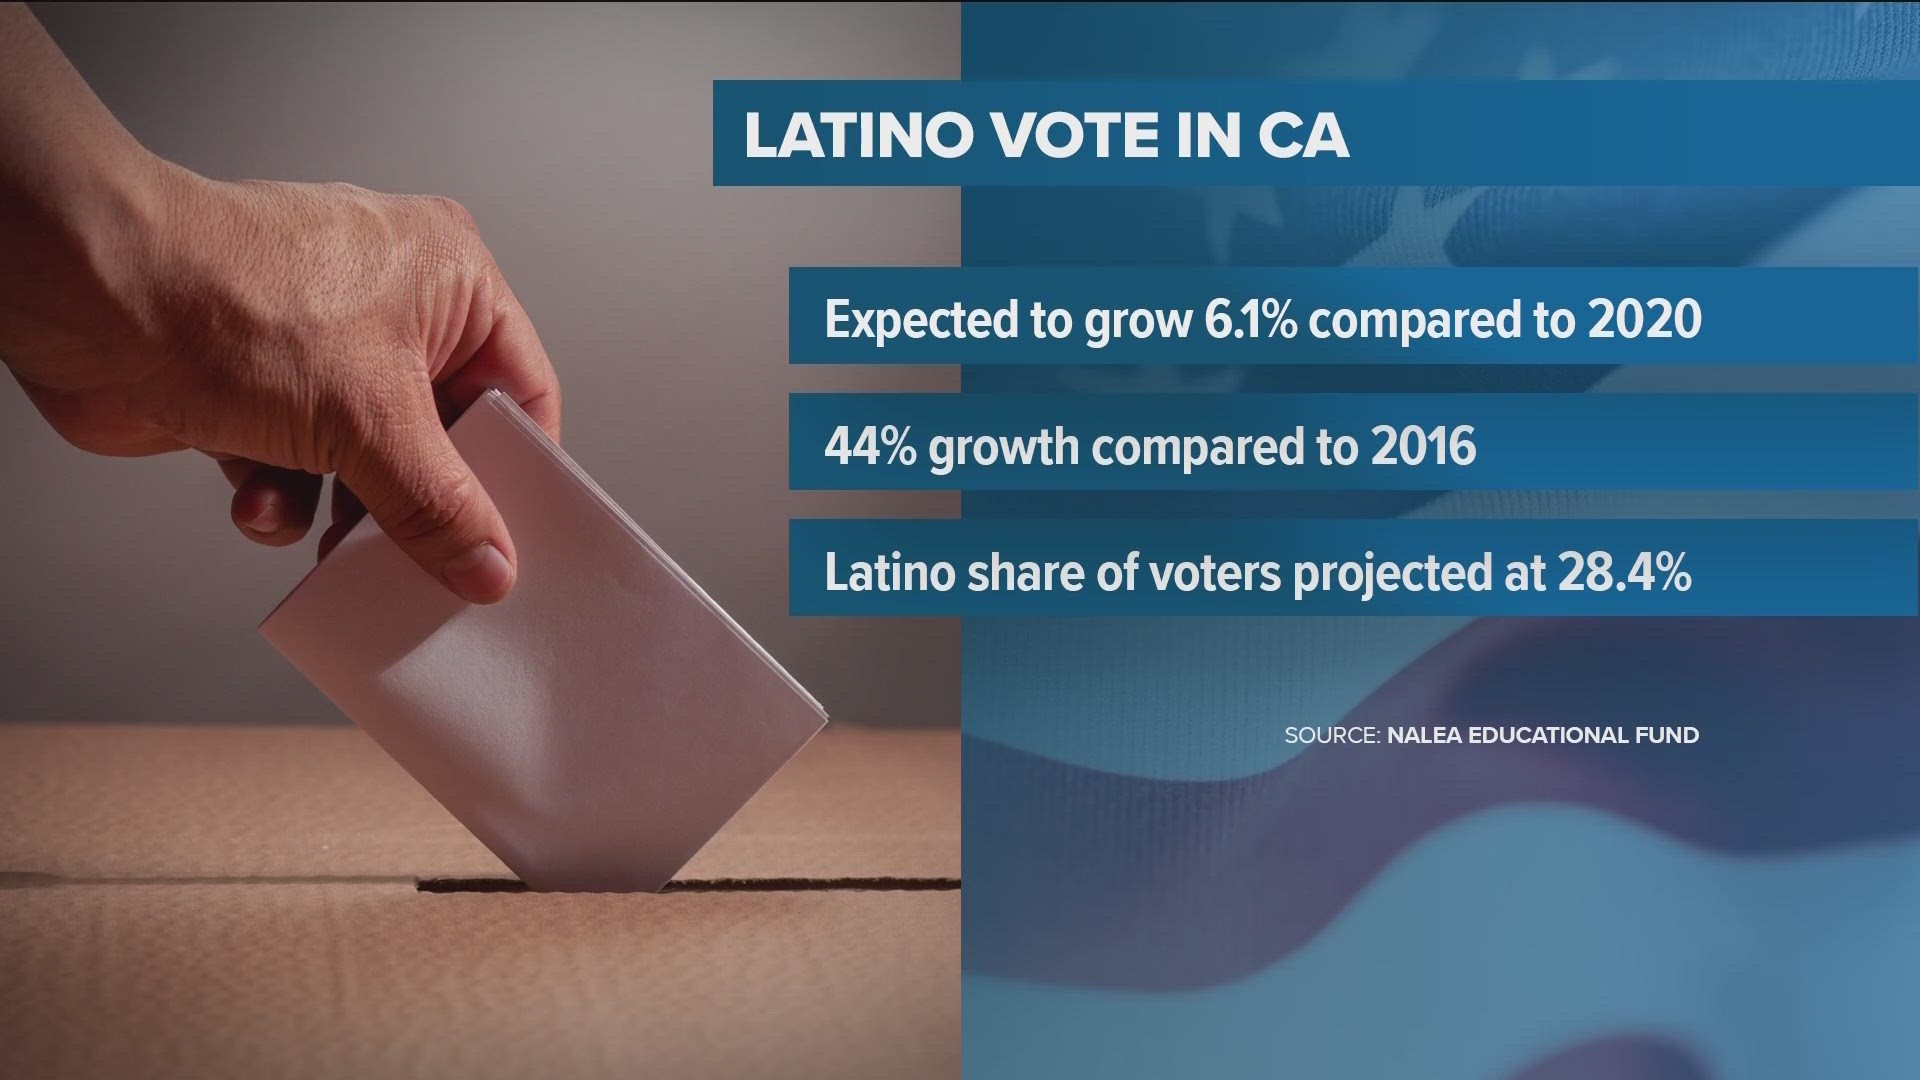 According to NALEO Educational Fund, Latino turnout will grow 6.1% from 2020 and 44% from 2016.